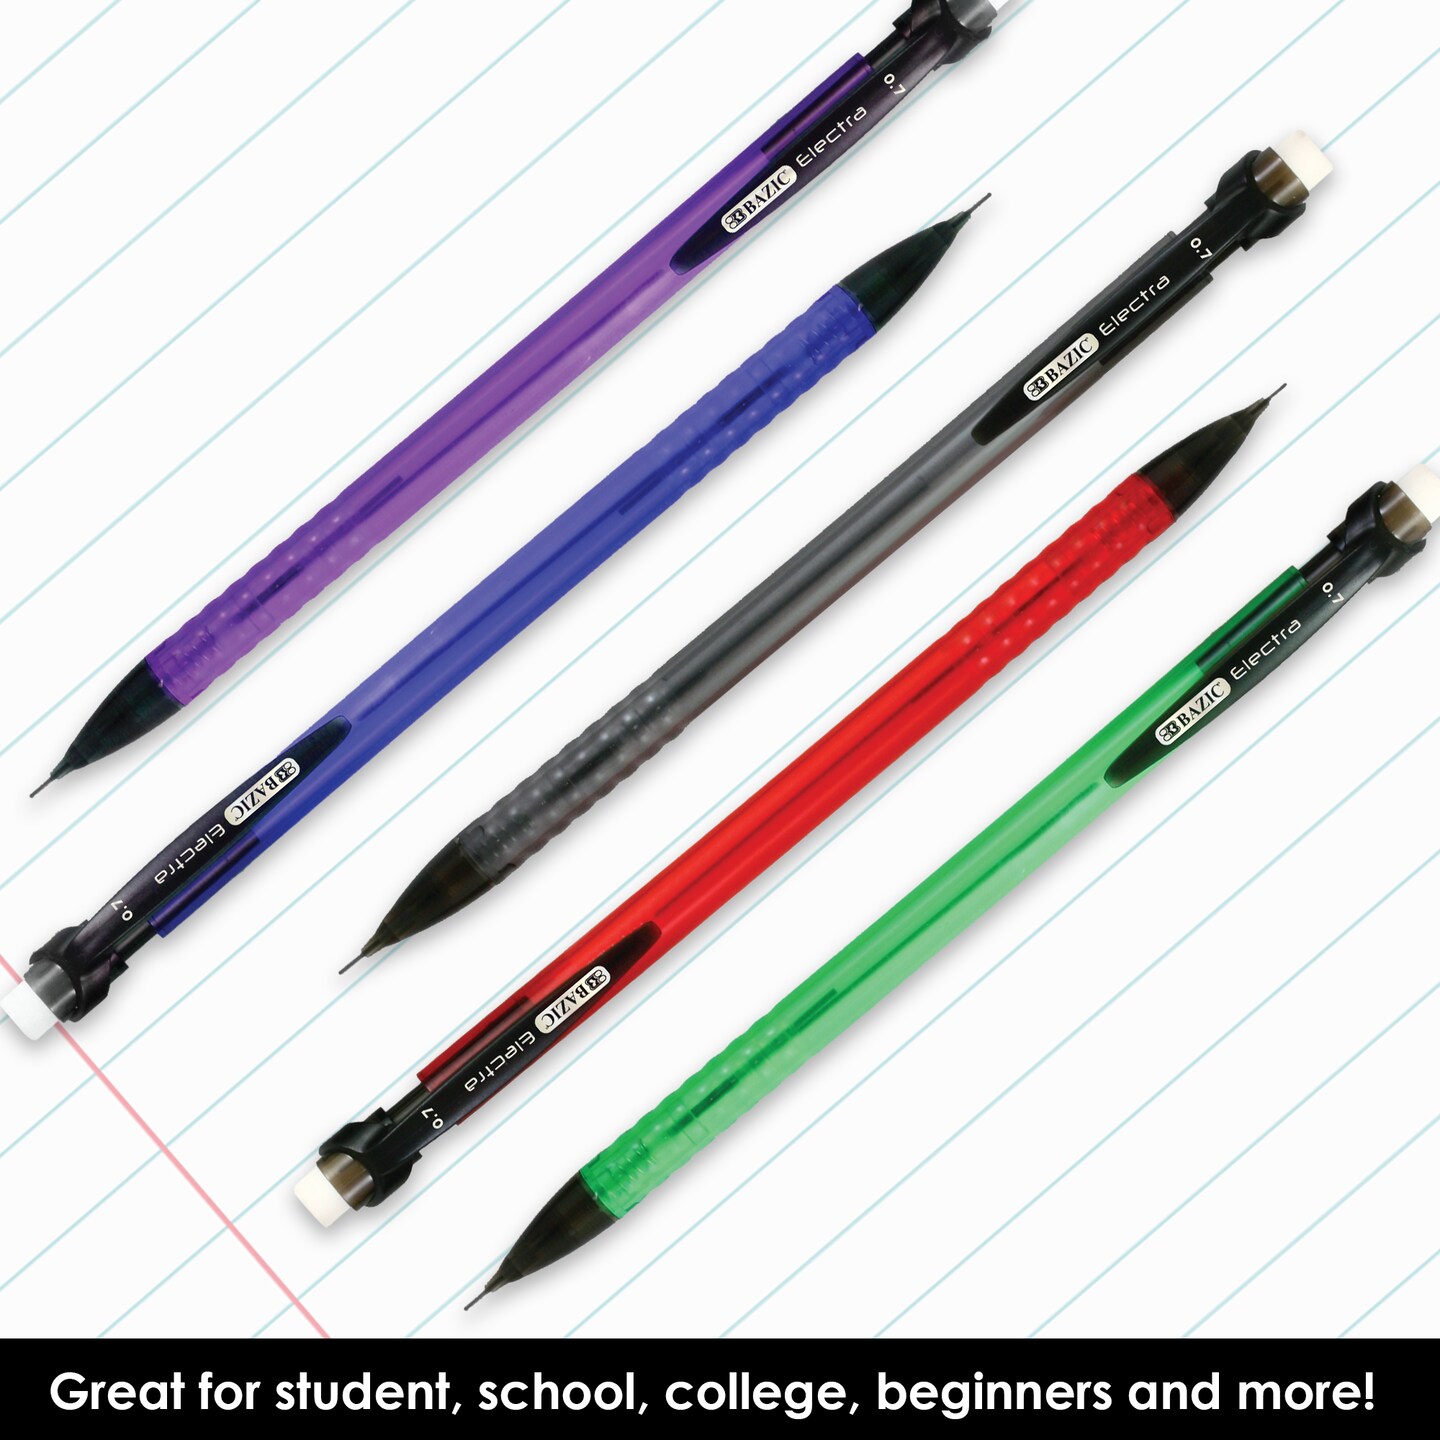 BAZIC 0.7 mm Electra Mechanical Pencil (5/Pack)